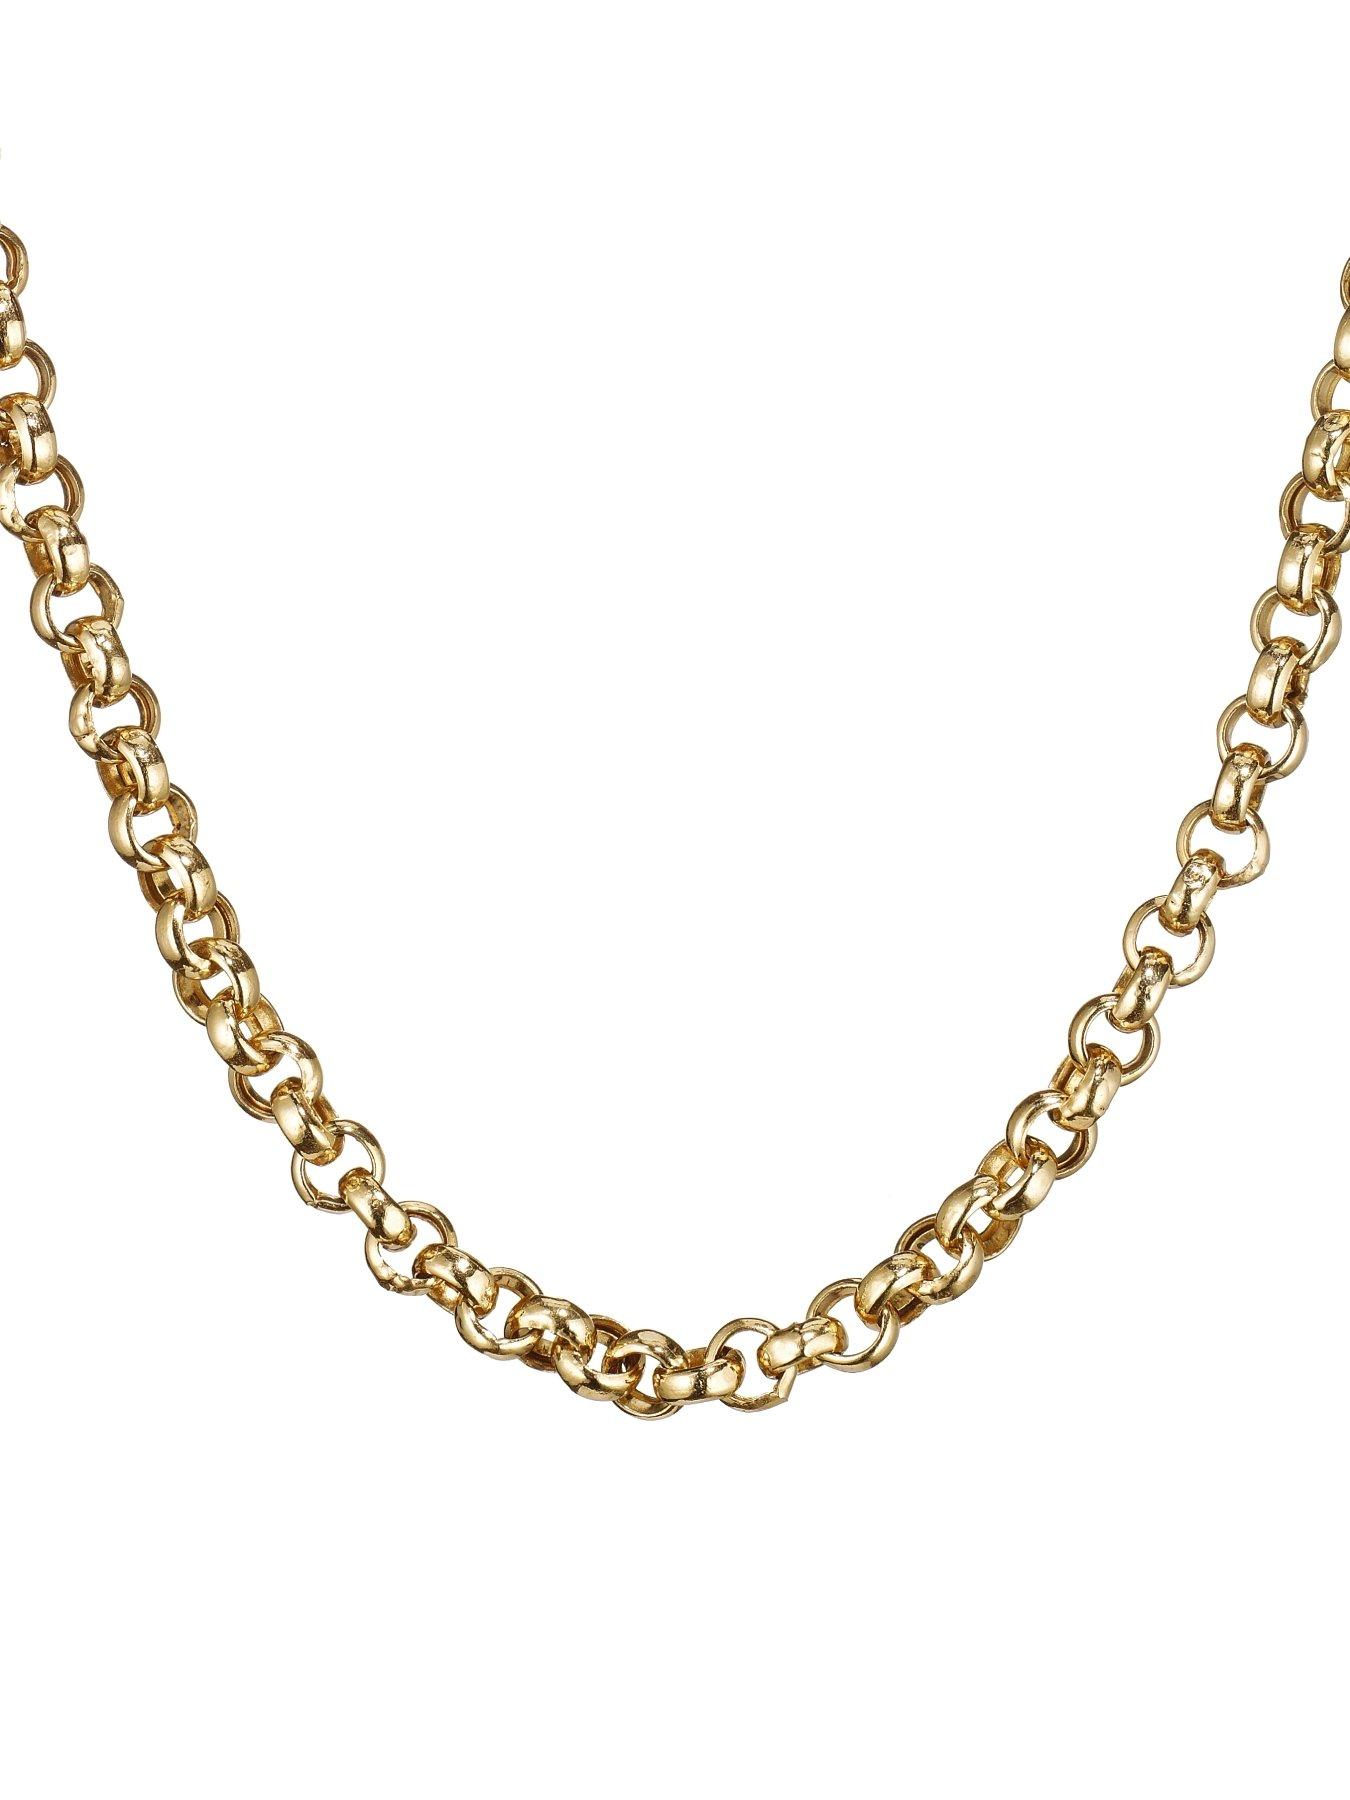 Chain | Womens | Necklaces | Gifts 